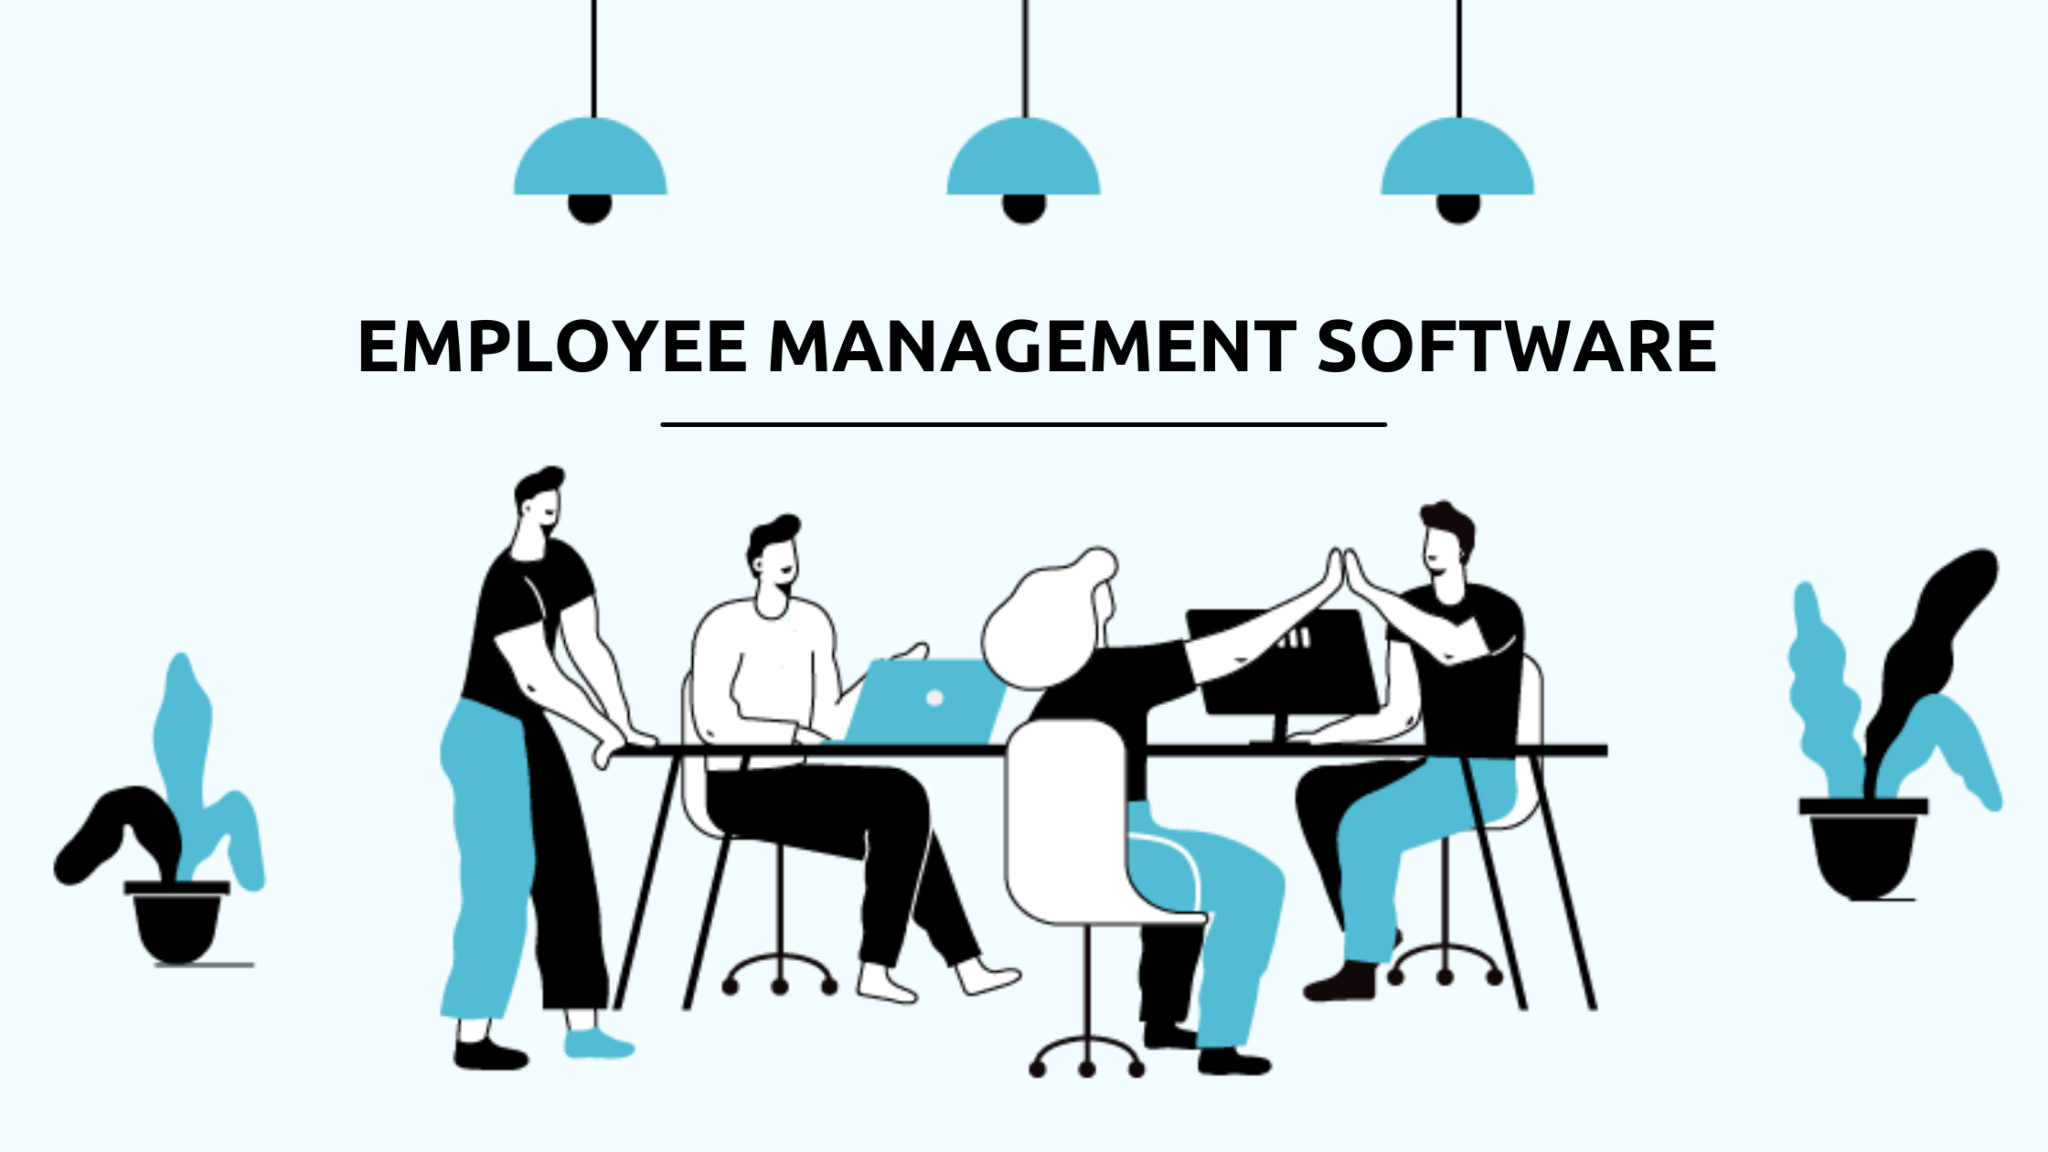 Take a Step Ahead with This Employee Management Software!